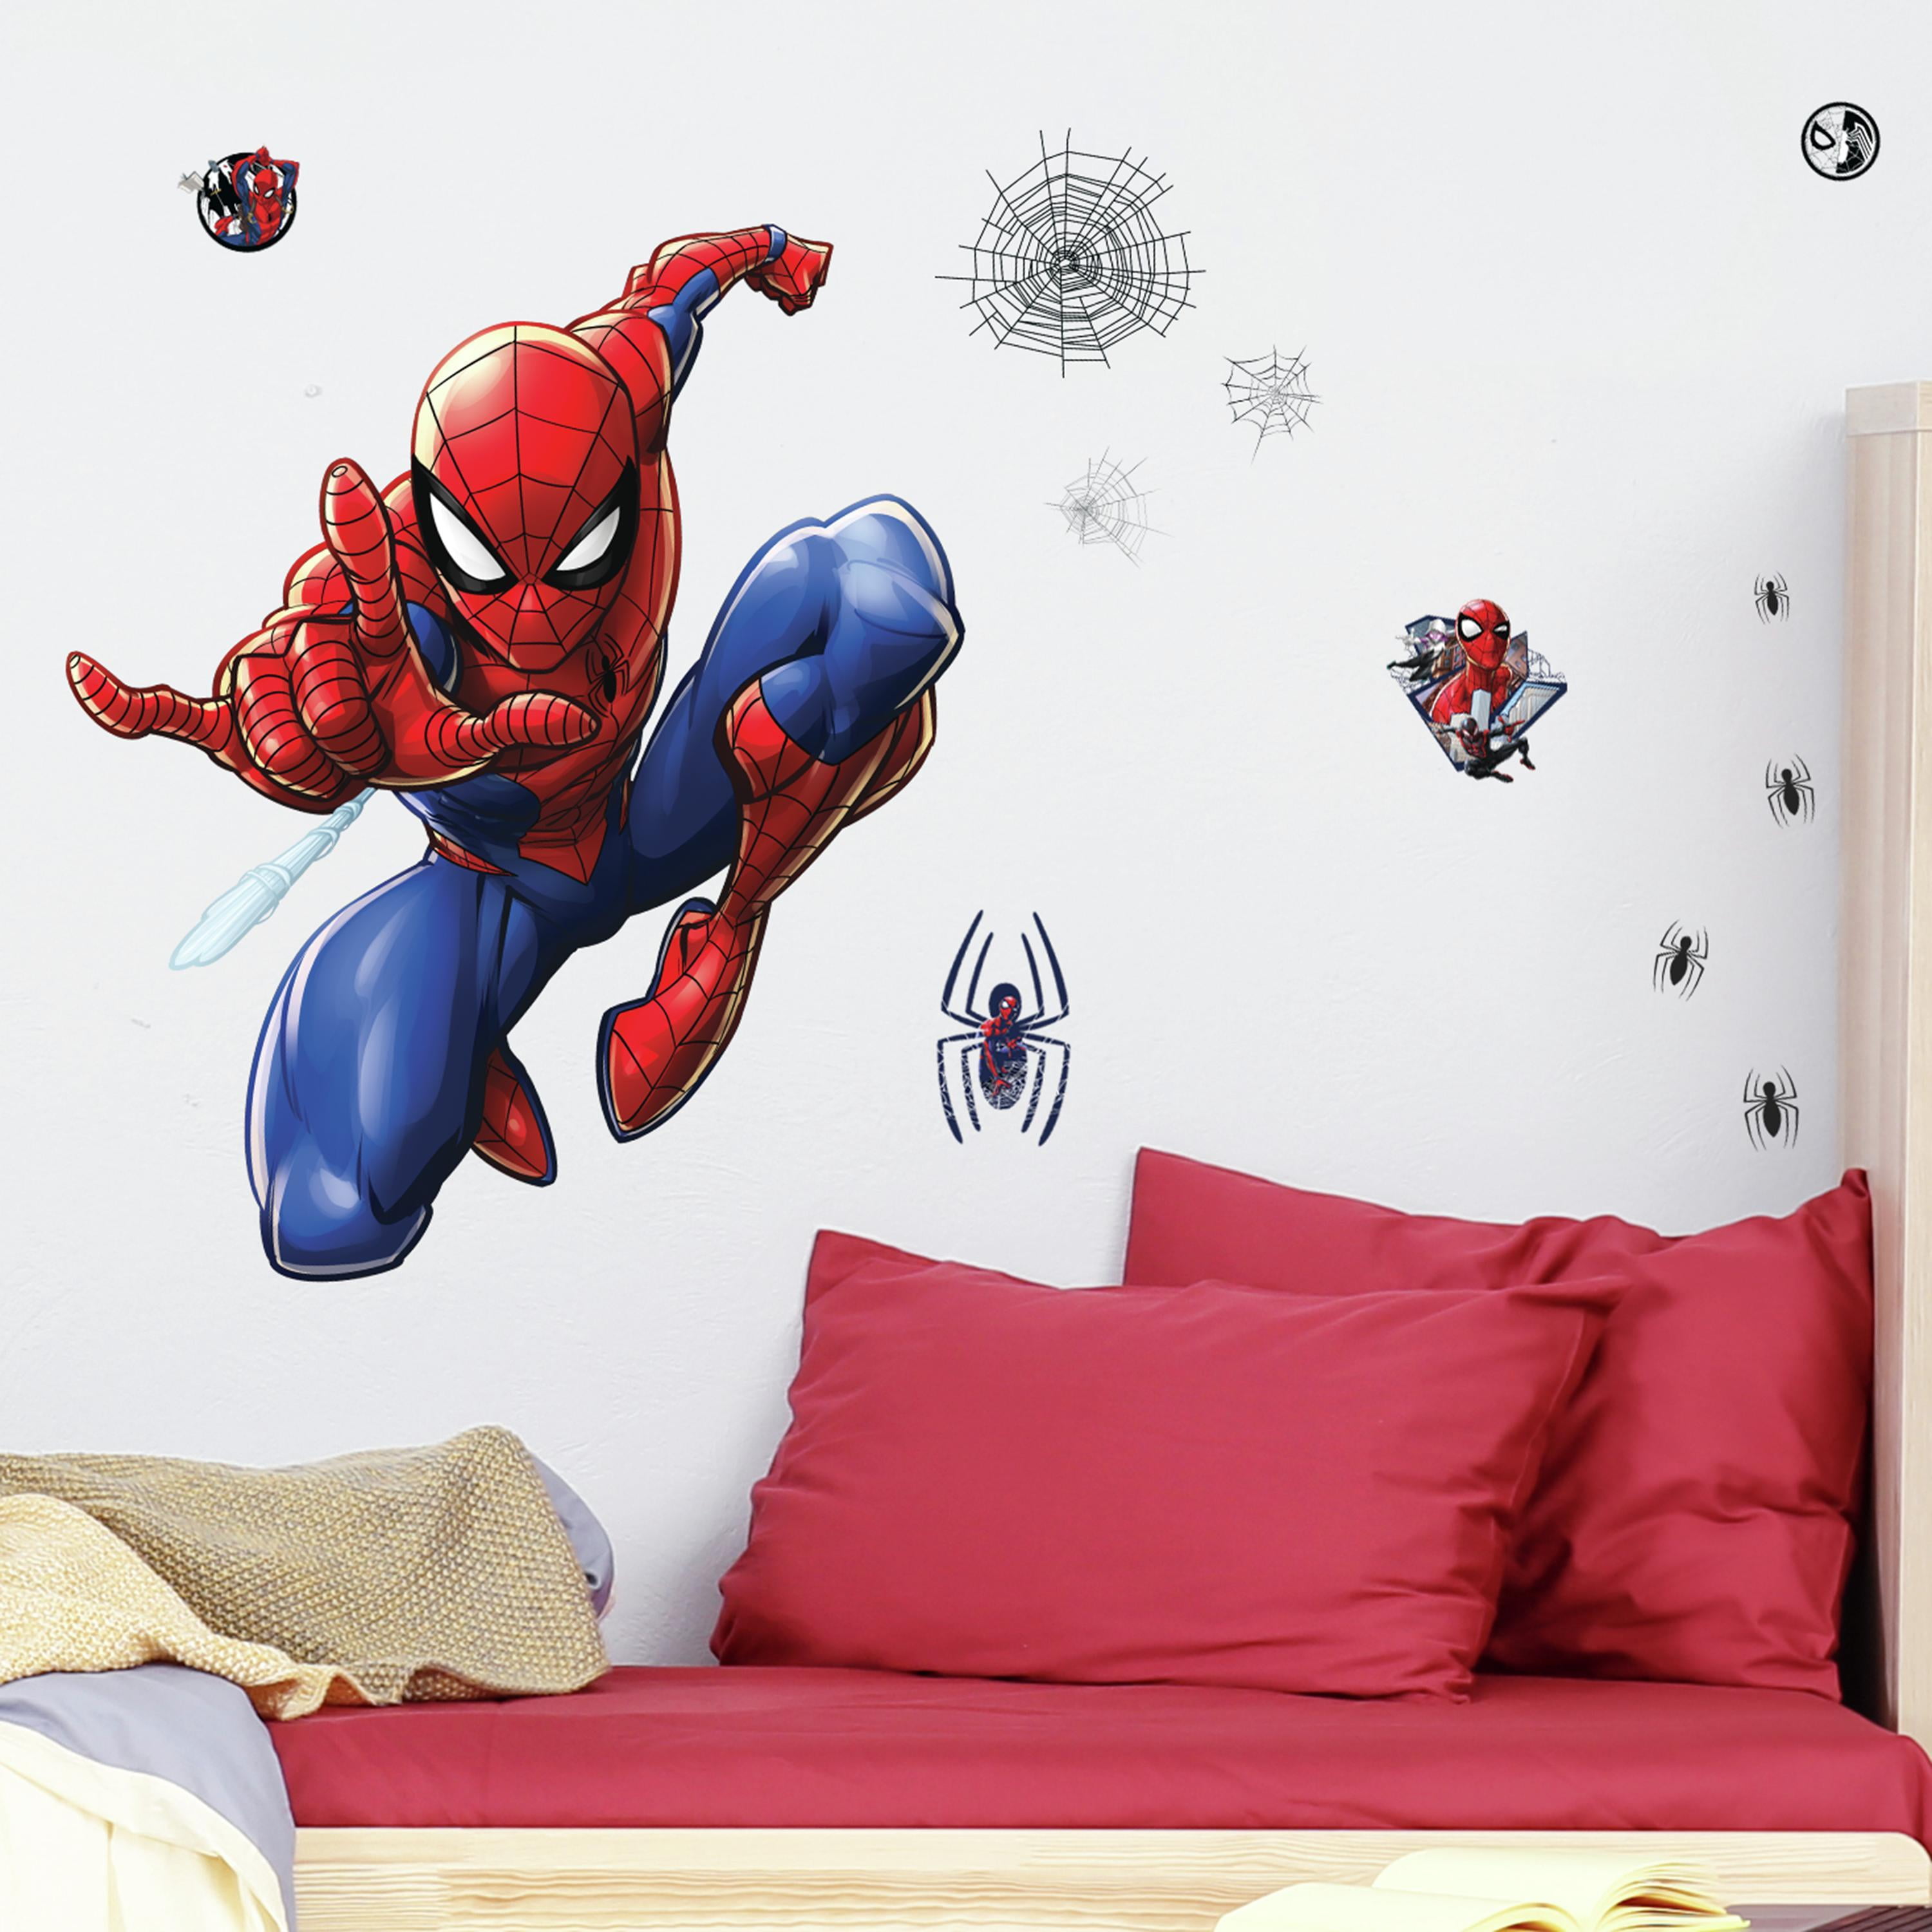 3D Spiderman Cartoon Movie HREO Home Decal Wall Sticker For Kid Room Decor Chil